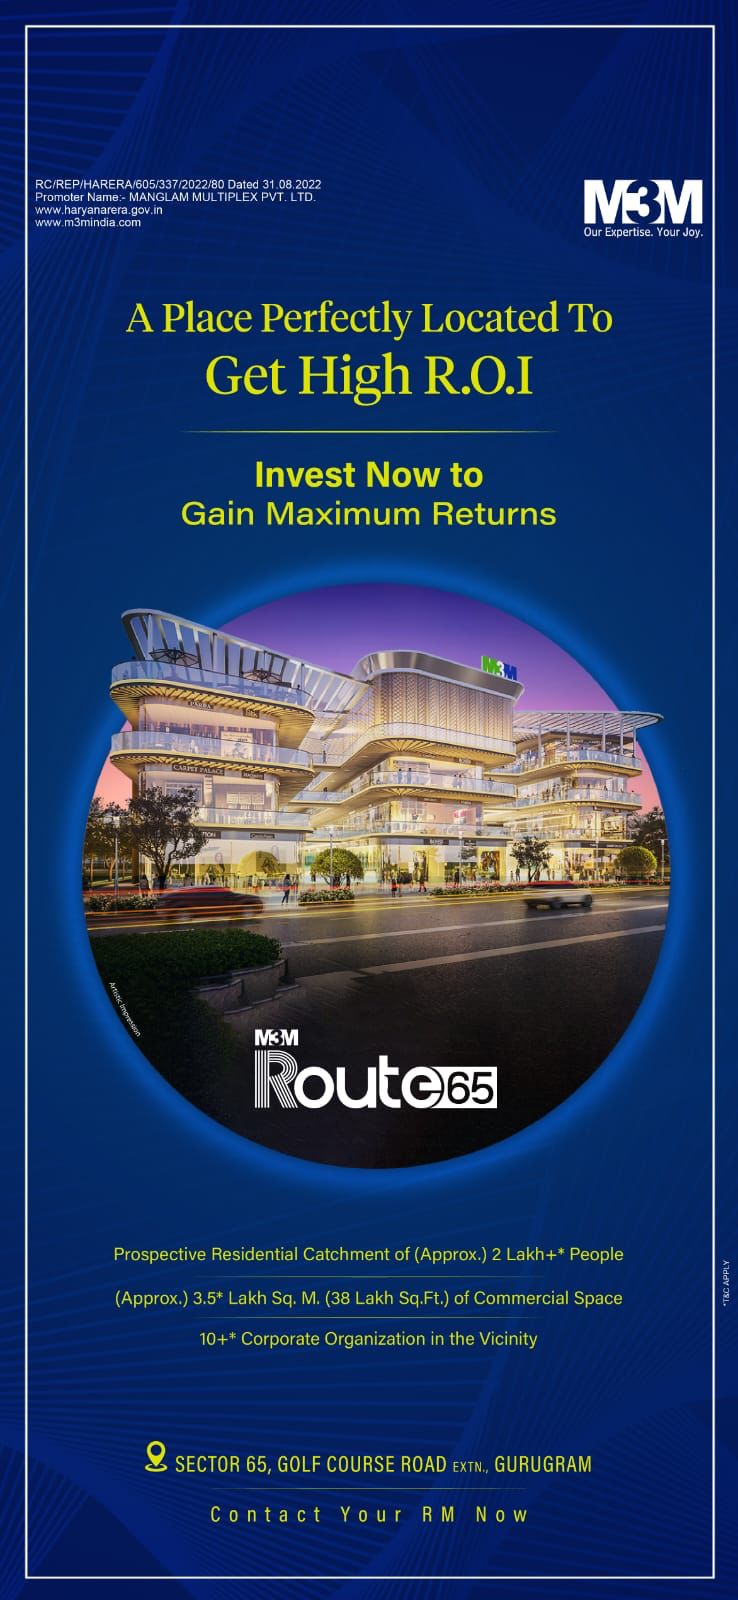 Maximizing Returns with M3M Route65: A New Commercial Epicenter in Gurugram Update